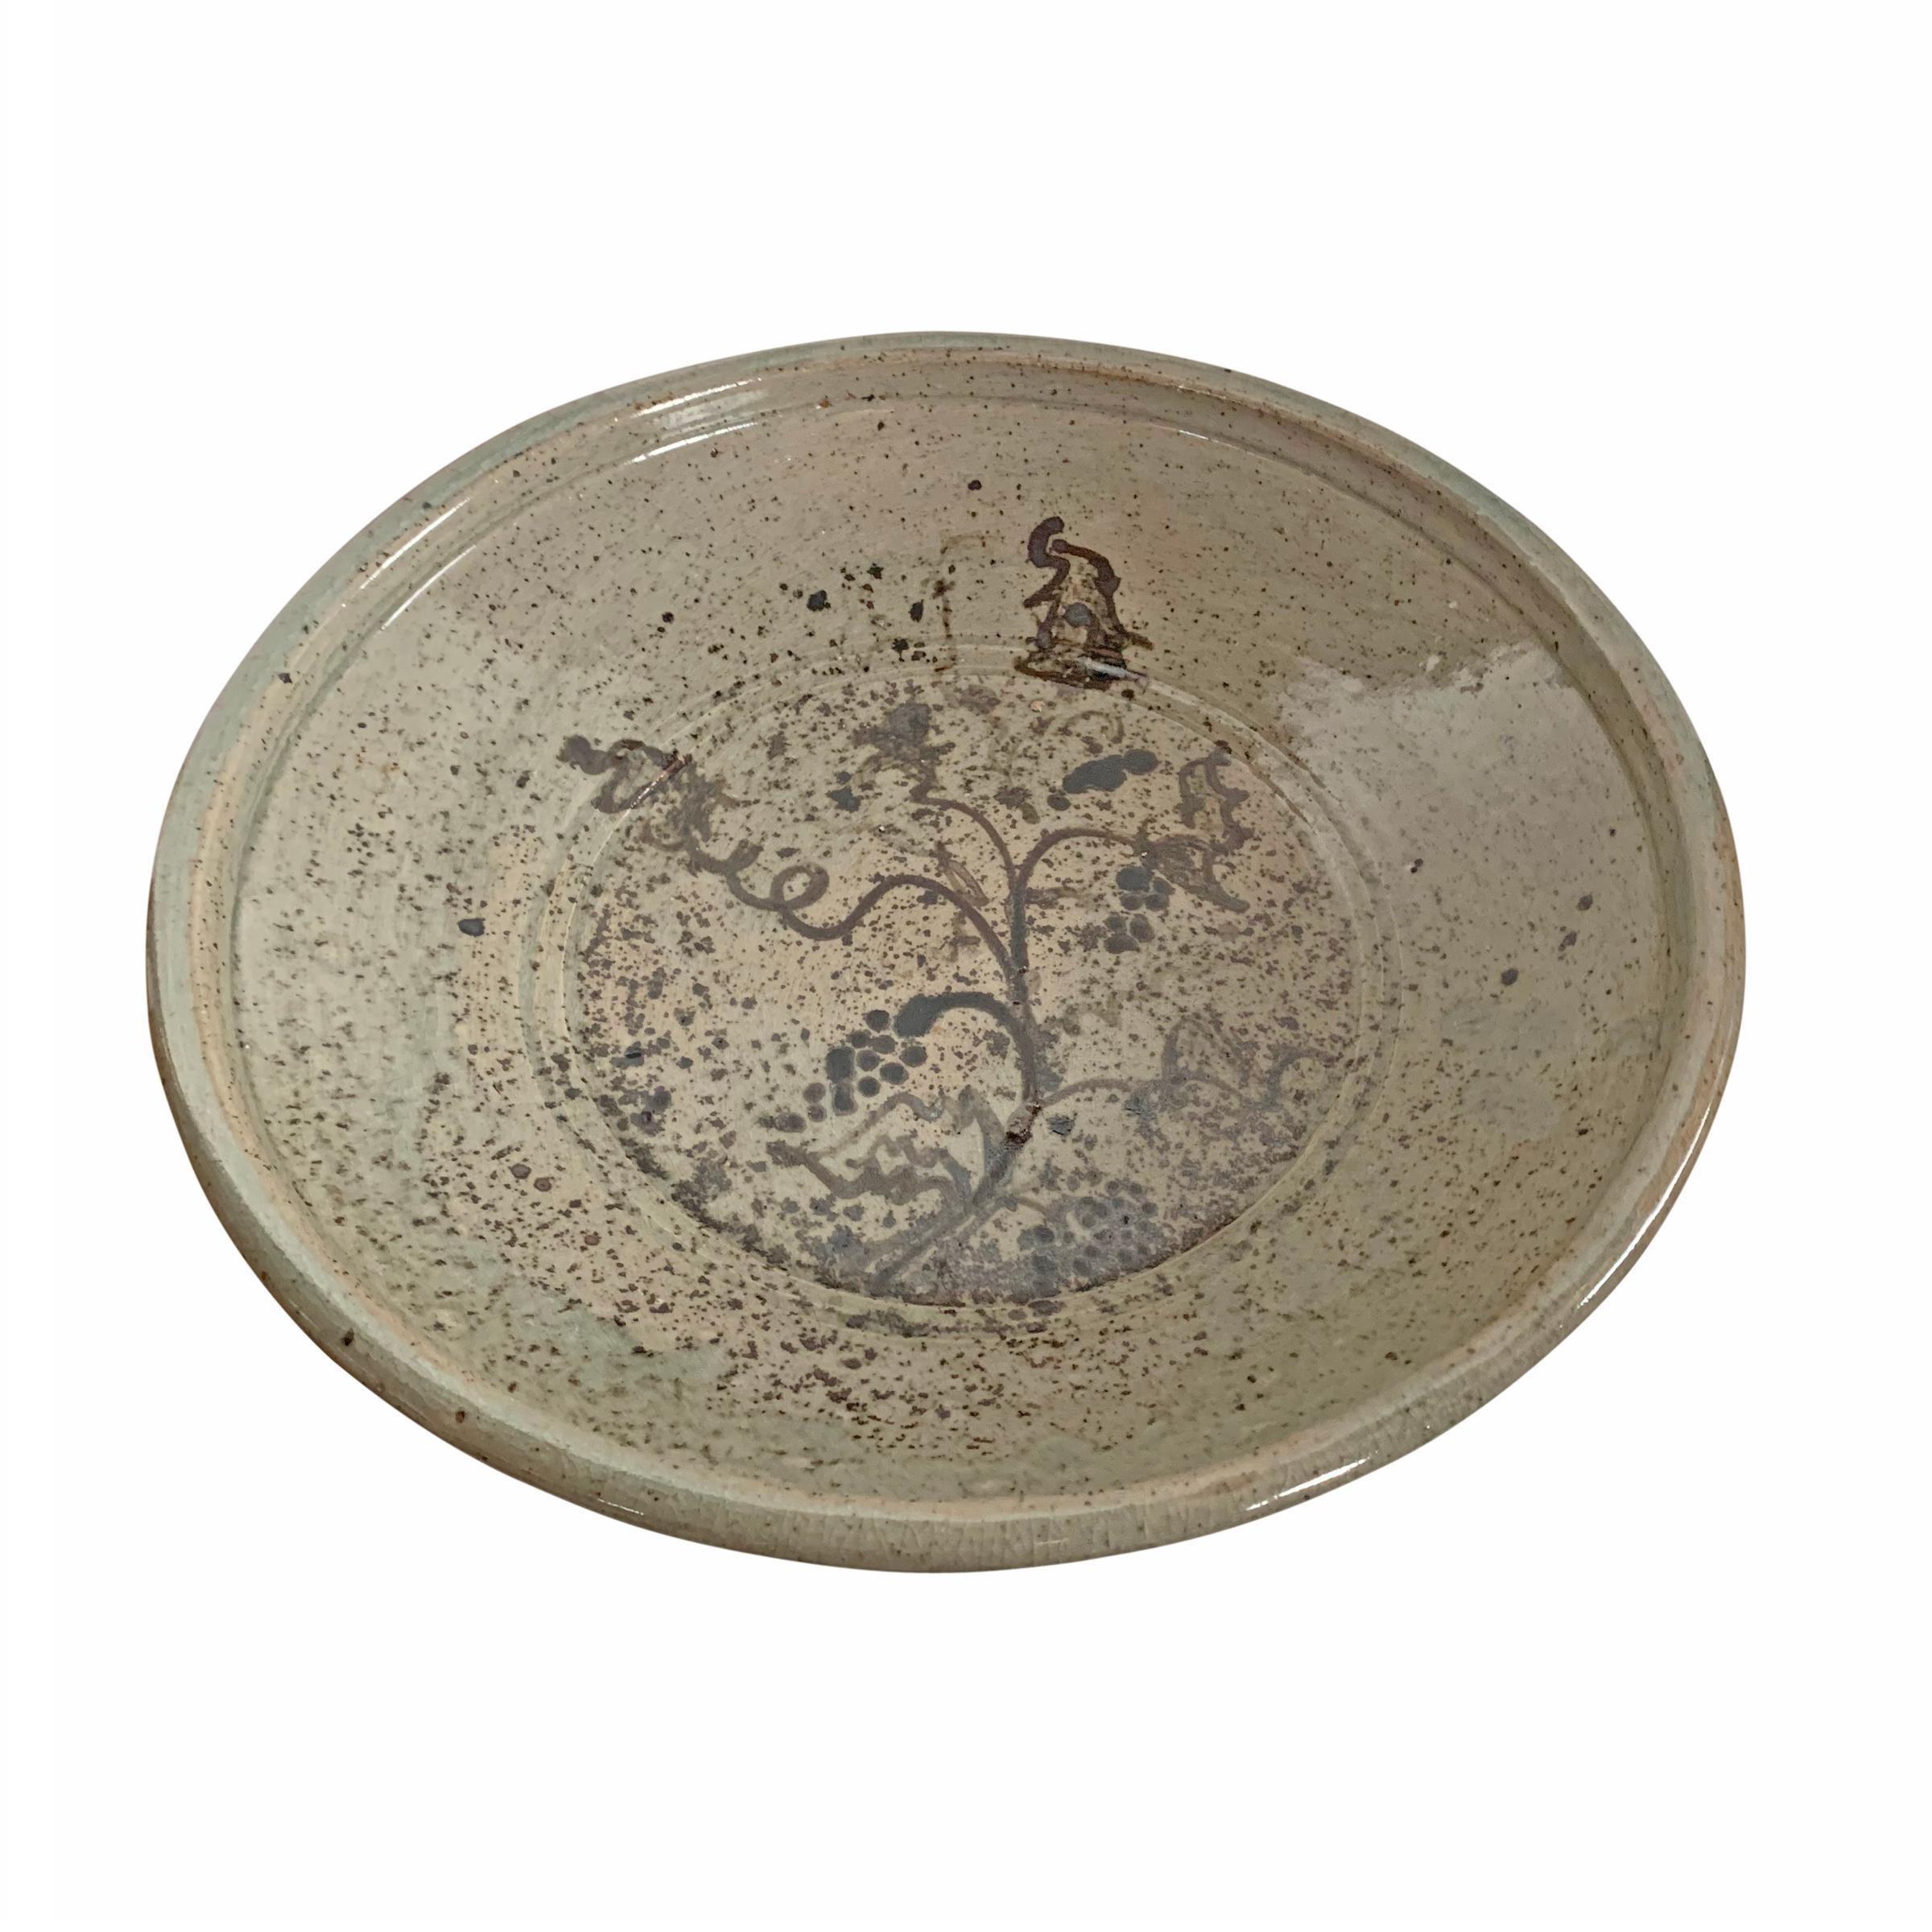 A wonderful late 20th century American Studio Pottery platter with a large stylized grape vine with grape clusters and a wonderful splatter glaze pattern.